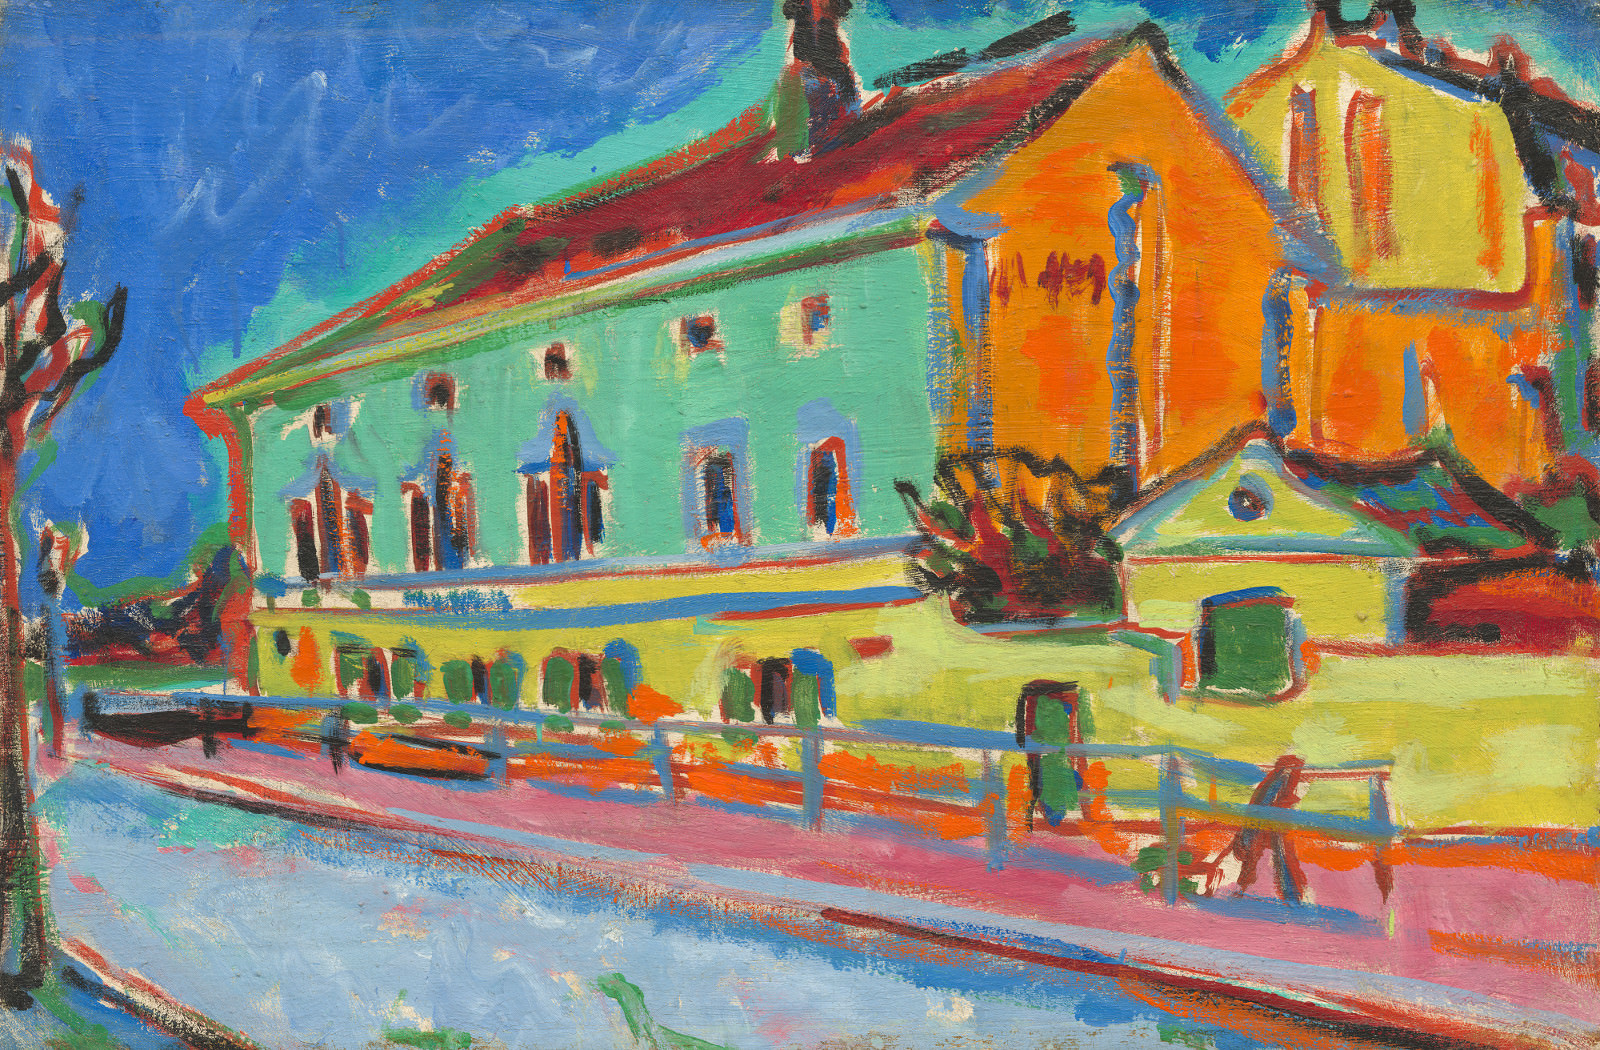 Fig. 10 – Dance Hall Bellevue, Ernst Ludwig Kirchner, 1909/1910, oil on canvas, 56 x 90 cm. National Gallery of Art, Washington. Ruth and Jacob Kainen Collection, Gift in Honor of the 50th Anniversary of the National Gallery of Art.